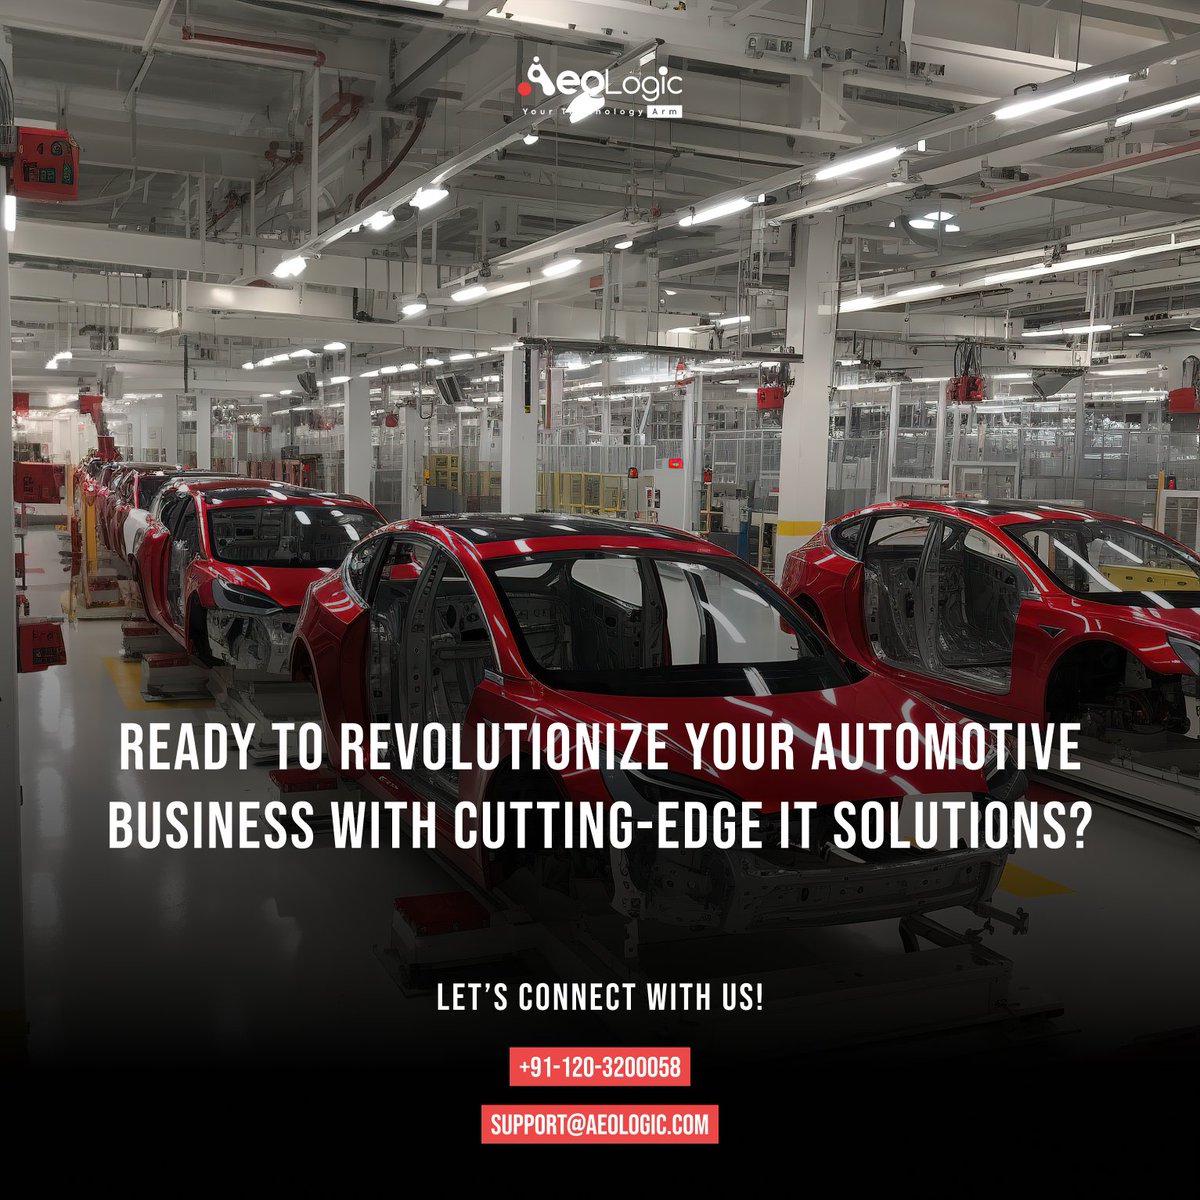 Are You Ready to Revolutionize Your Automotive Business with Cutting-Edge IT Solutions?  

Contact us at +91-120-3200058 or 📧 email us at support@aeologic.com.  

#AutomotiveTech #ITsolutions #InnovationInAuto #AeologicTechnologies  #SmartAutomotive #ConnectivitySolutions